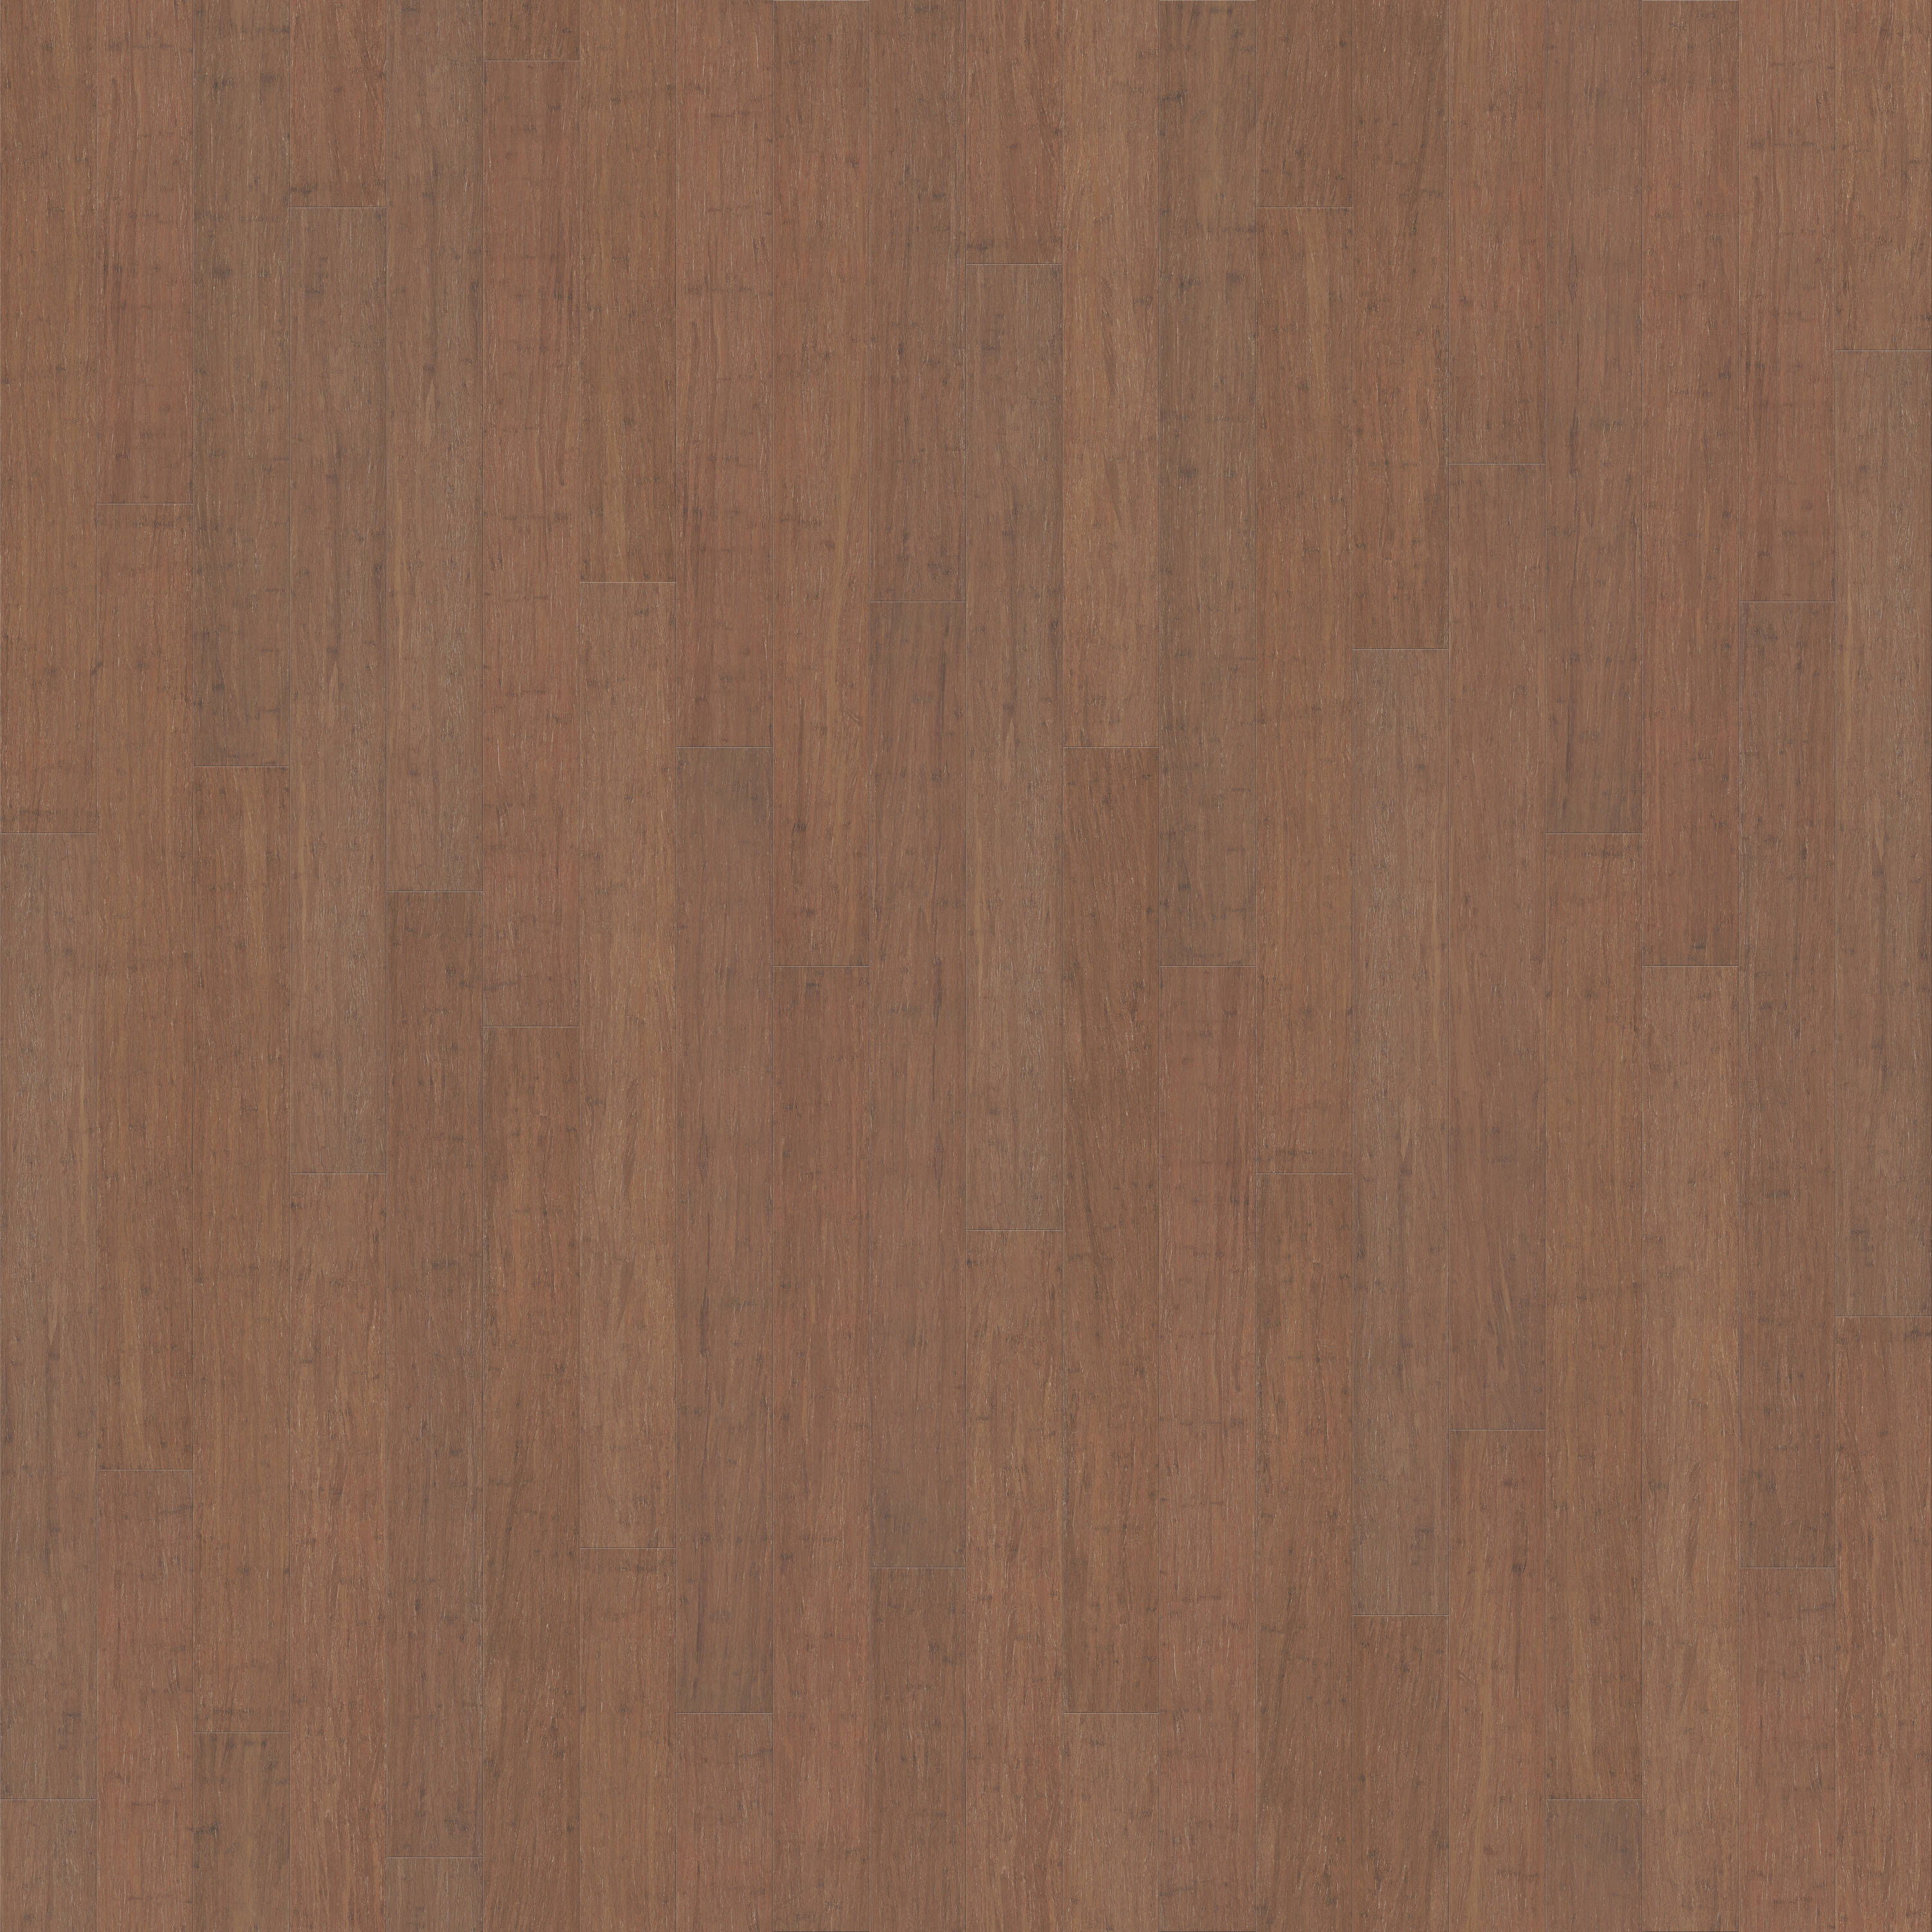 CALI Bamboo (Engineered) Palm Canyon Bamboo 5-5/16-in W x 9/16-in T x 72-in Smooth/Traditional Engineered Hardwood Flooring (21.5-sq ft) in Brown -  7014009500